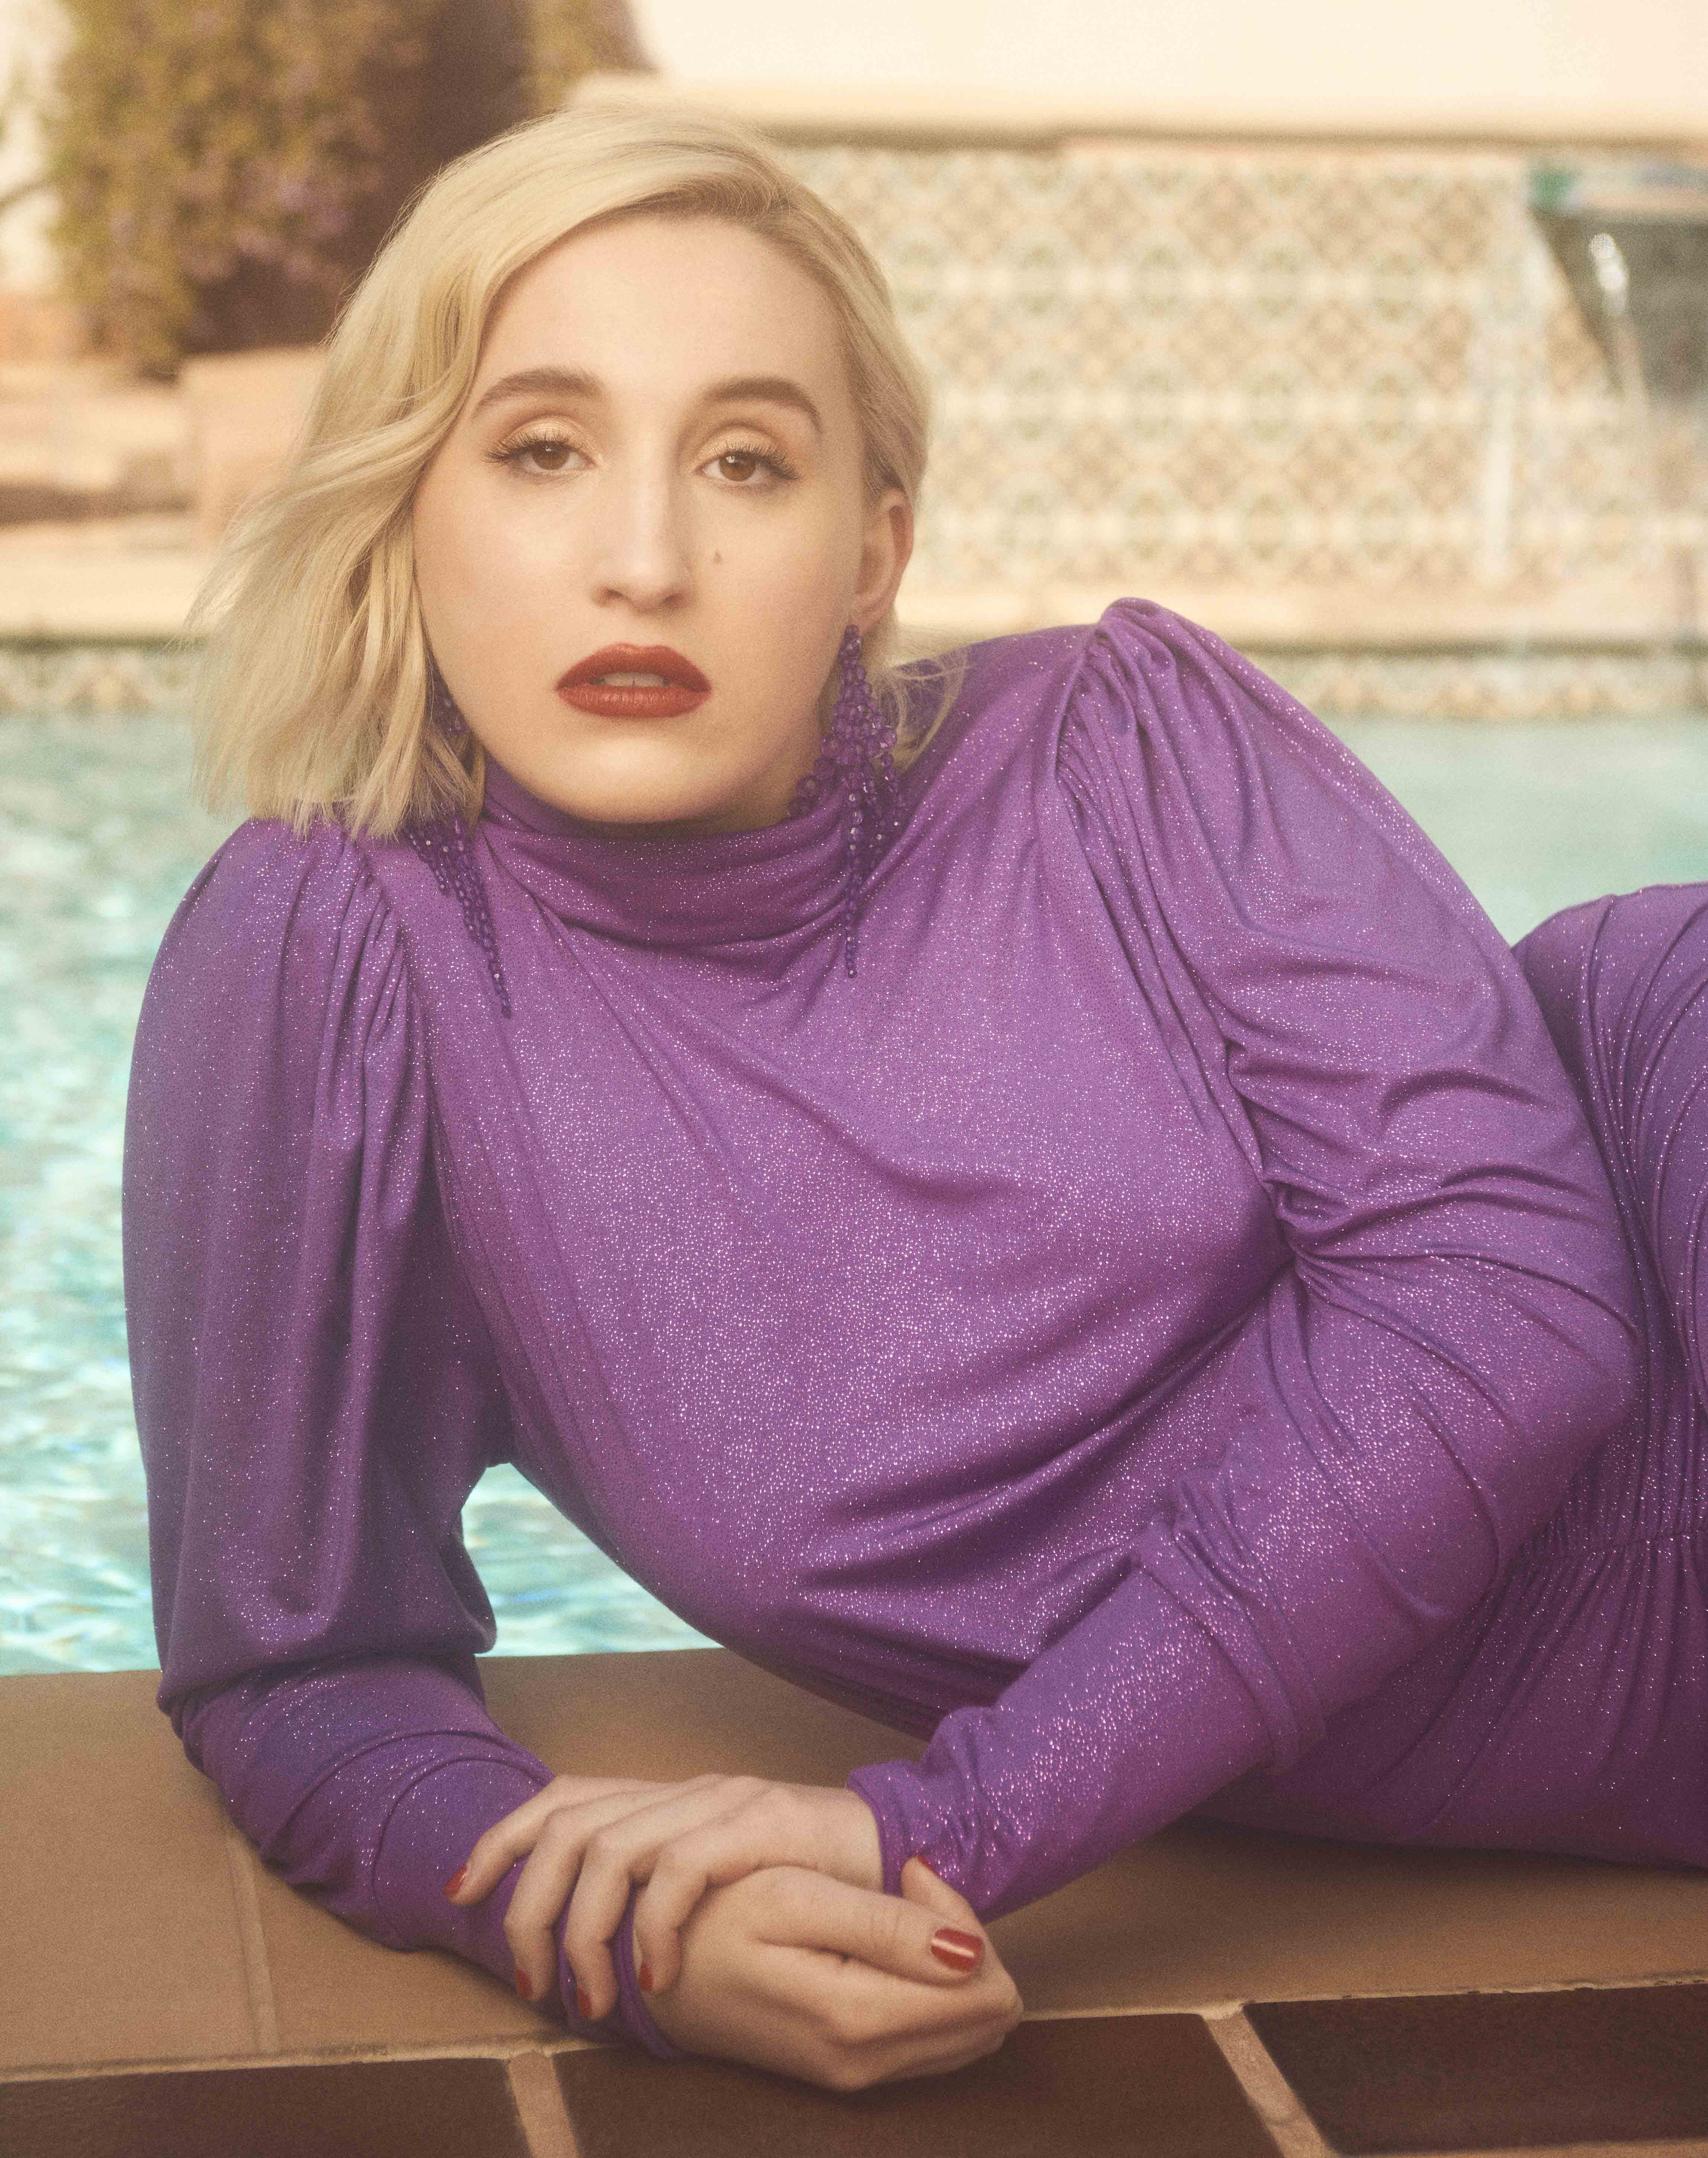 daryll benitez recommends harley quinn smith nude pic